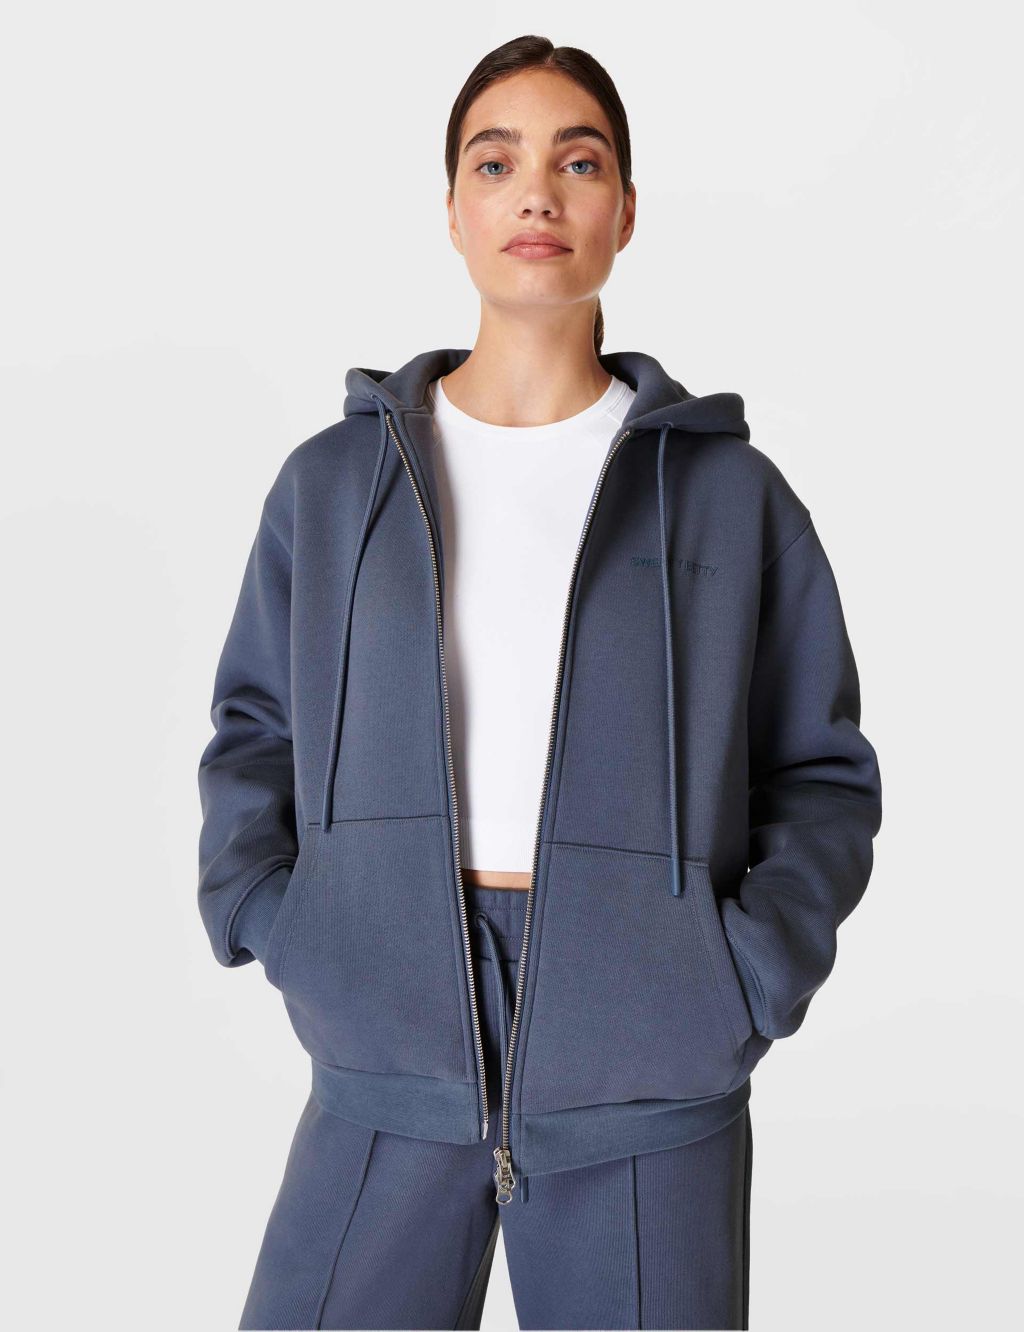 Elevated Cotton Rich Zip Up Hoodie image 3